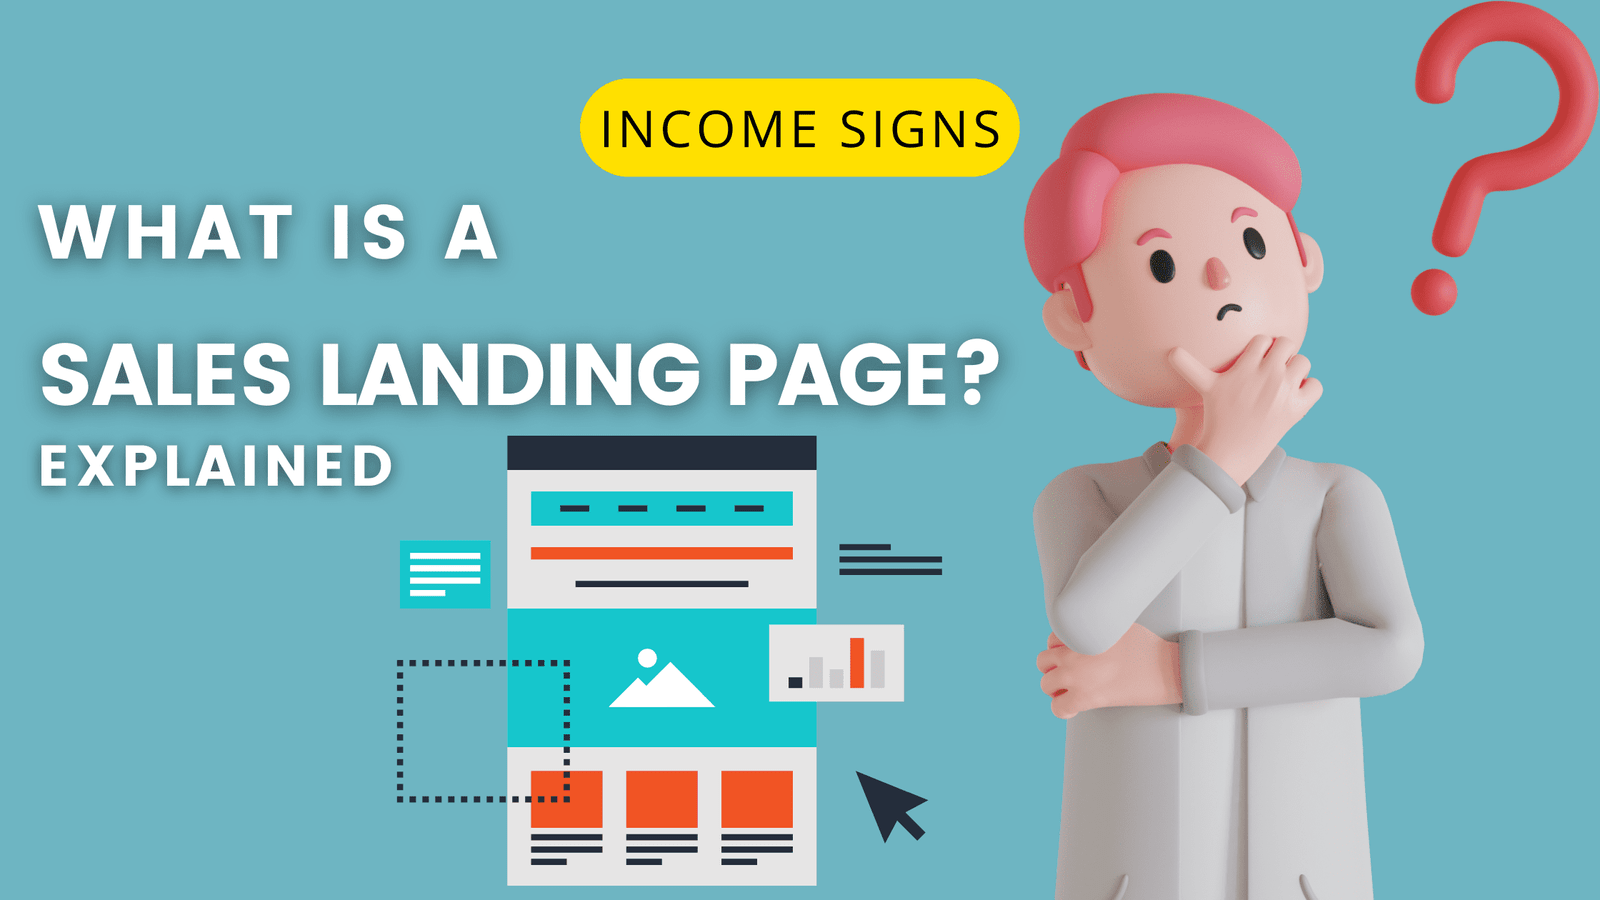 What Is a Sales Landing Page?